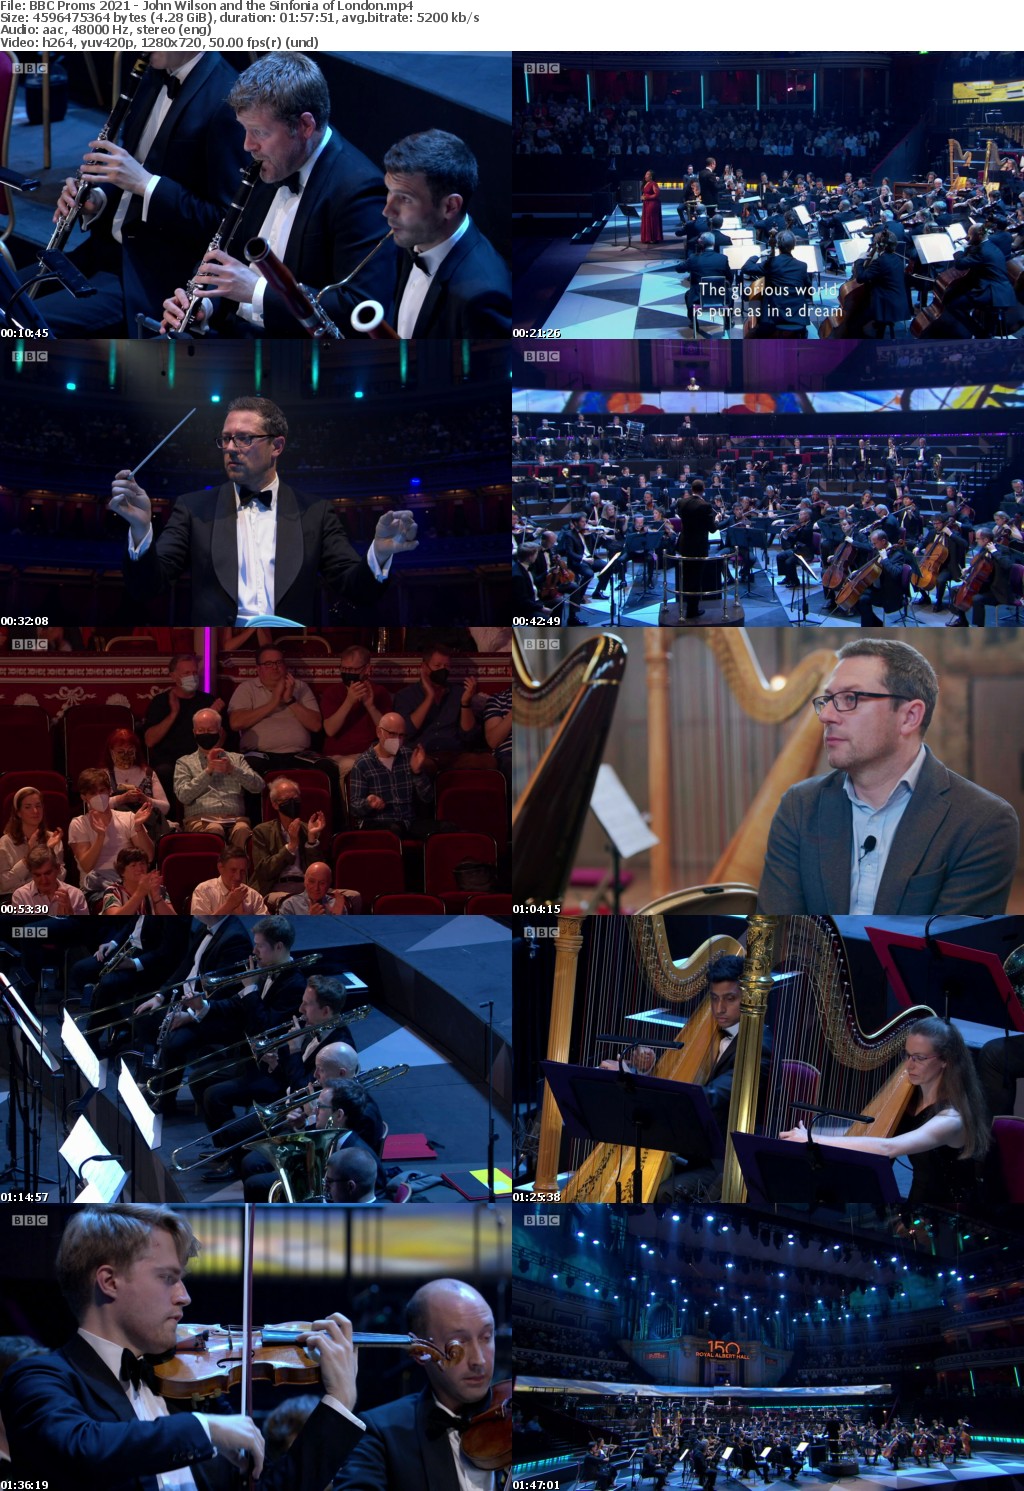 BBC Proms 2021 - John Wilson and the Sinfonia of London (1280x720p HD, 50fps, soft Eng subs)